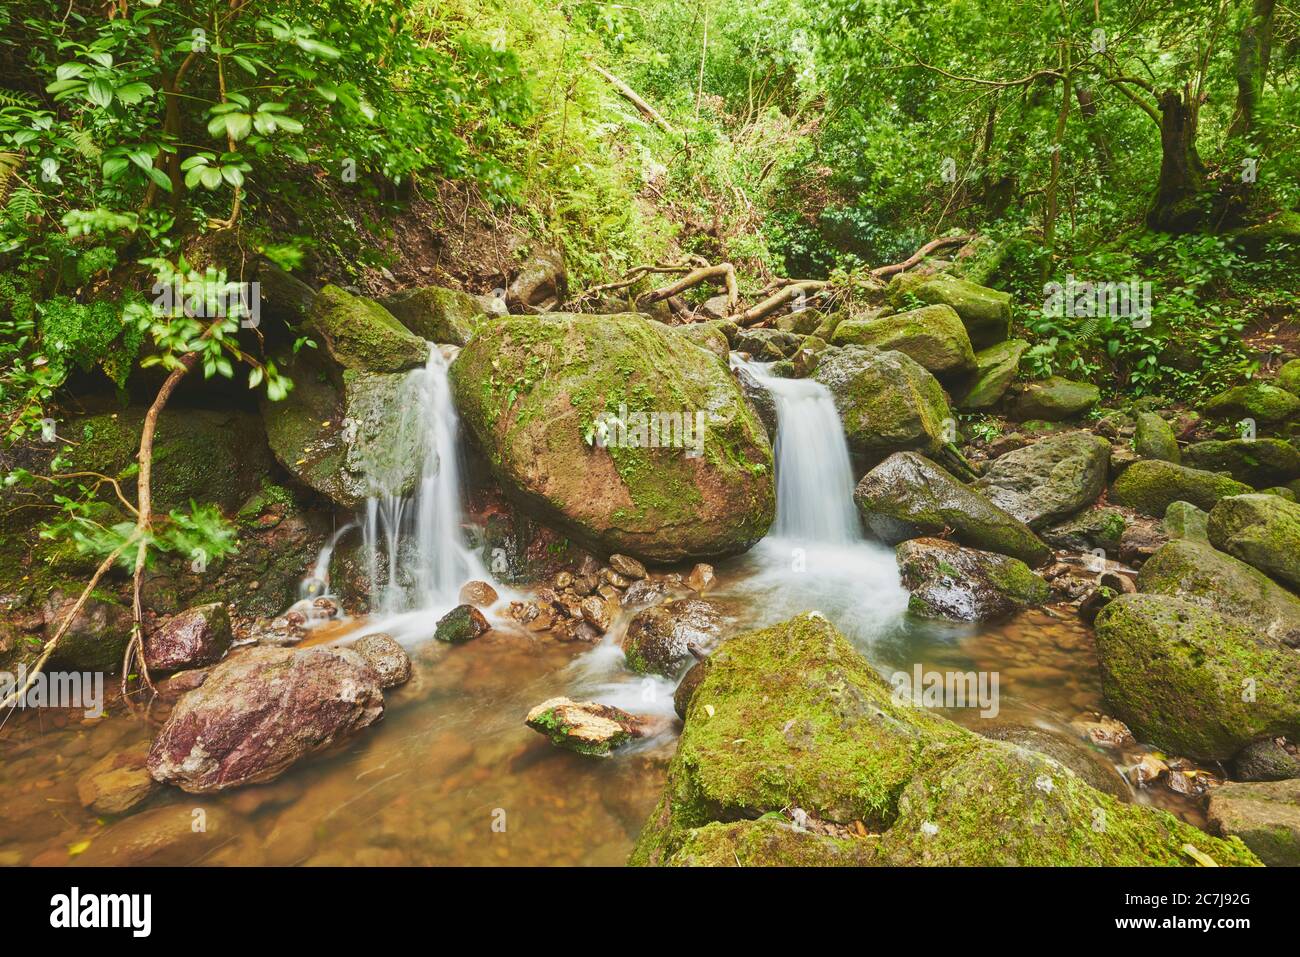 stream in a Rainforest at the Lulumahu trail to the Lulumahu falls, USA, Hawaii, Oahu, Honolulu Watershed Forest Reserve Stock Photo